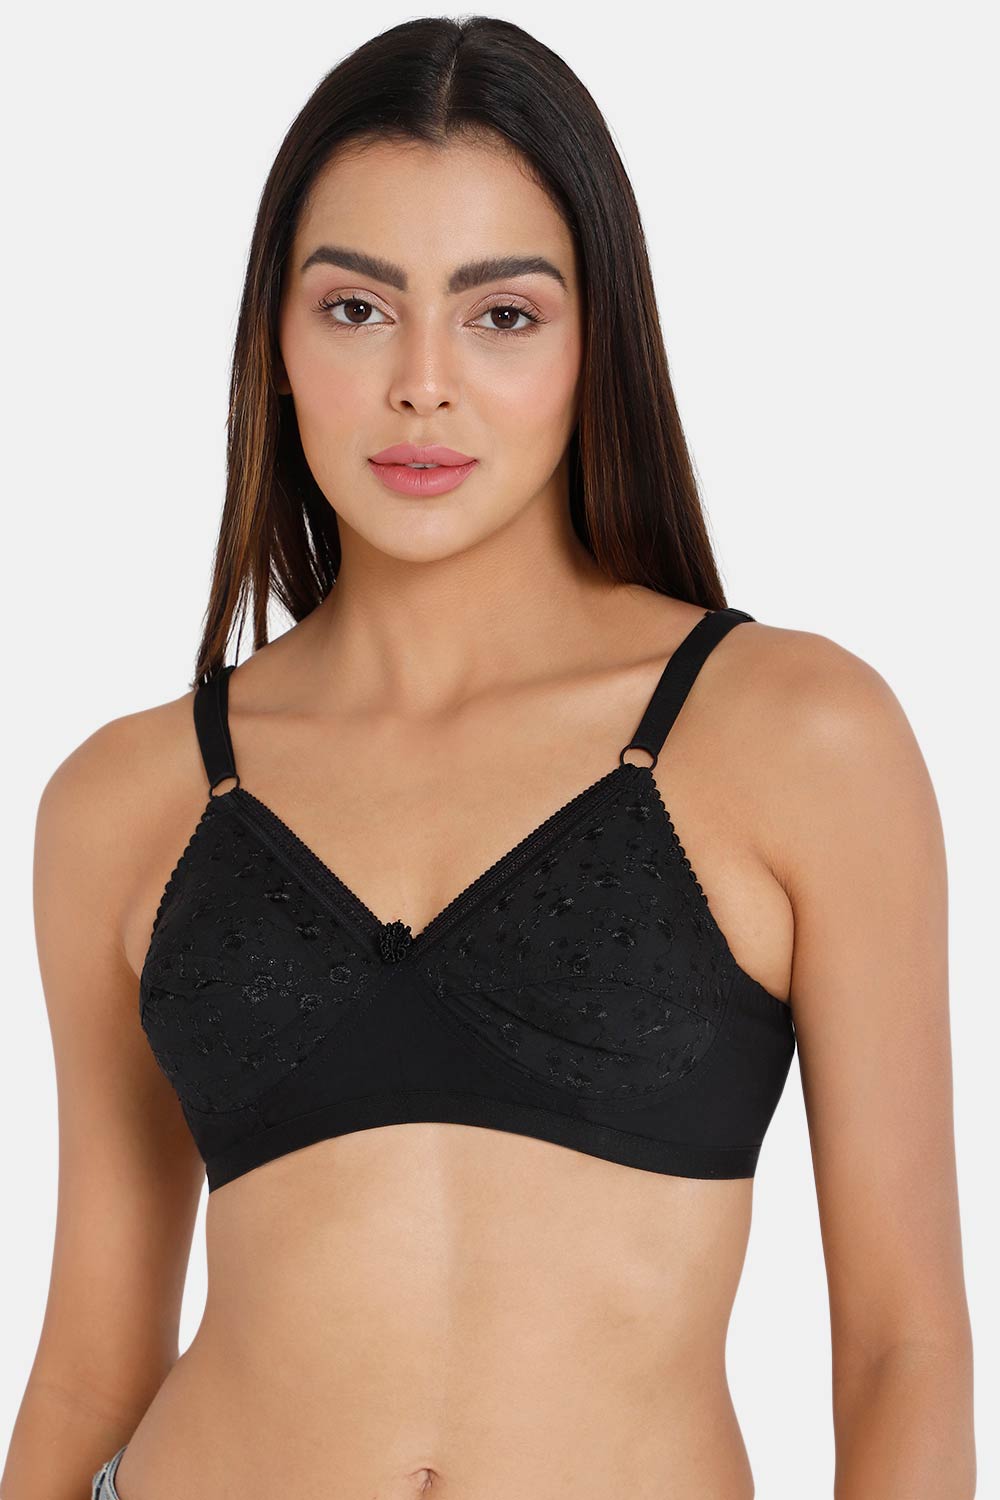 40h Size Bras in Hooghly - Dealers, Manufacturers & Suppliers